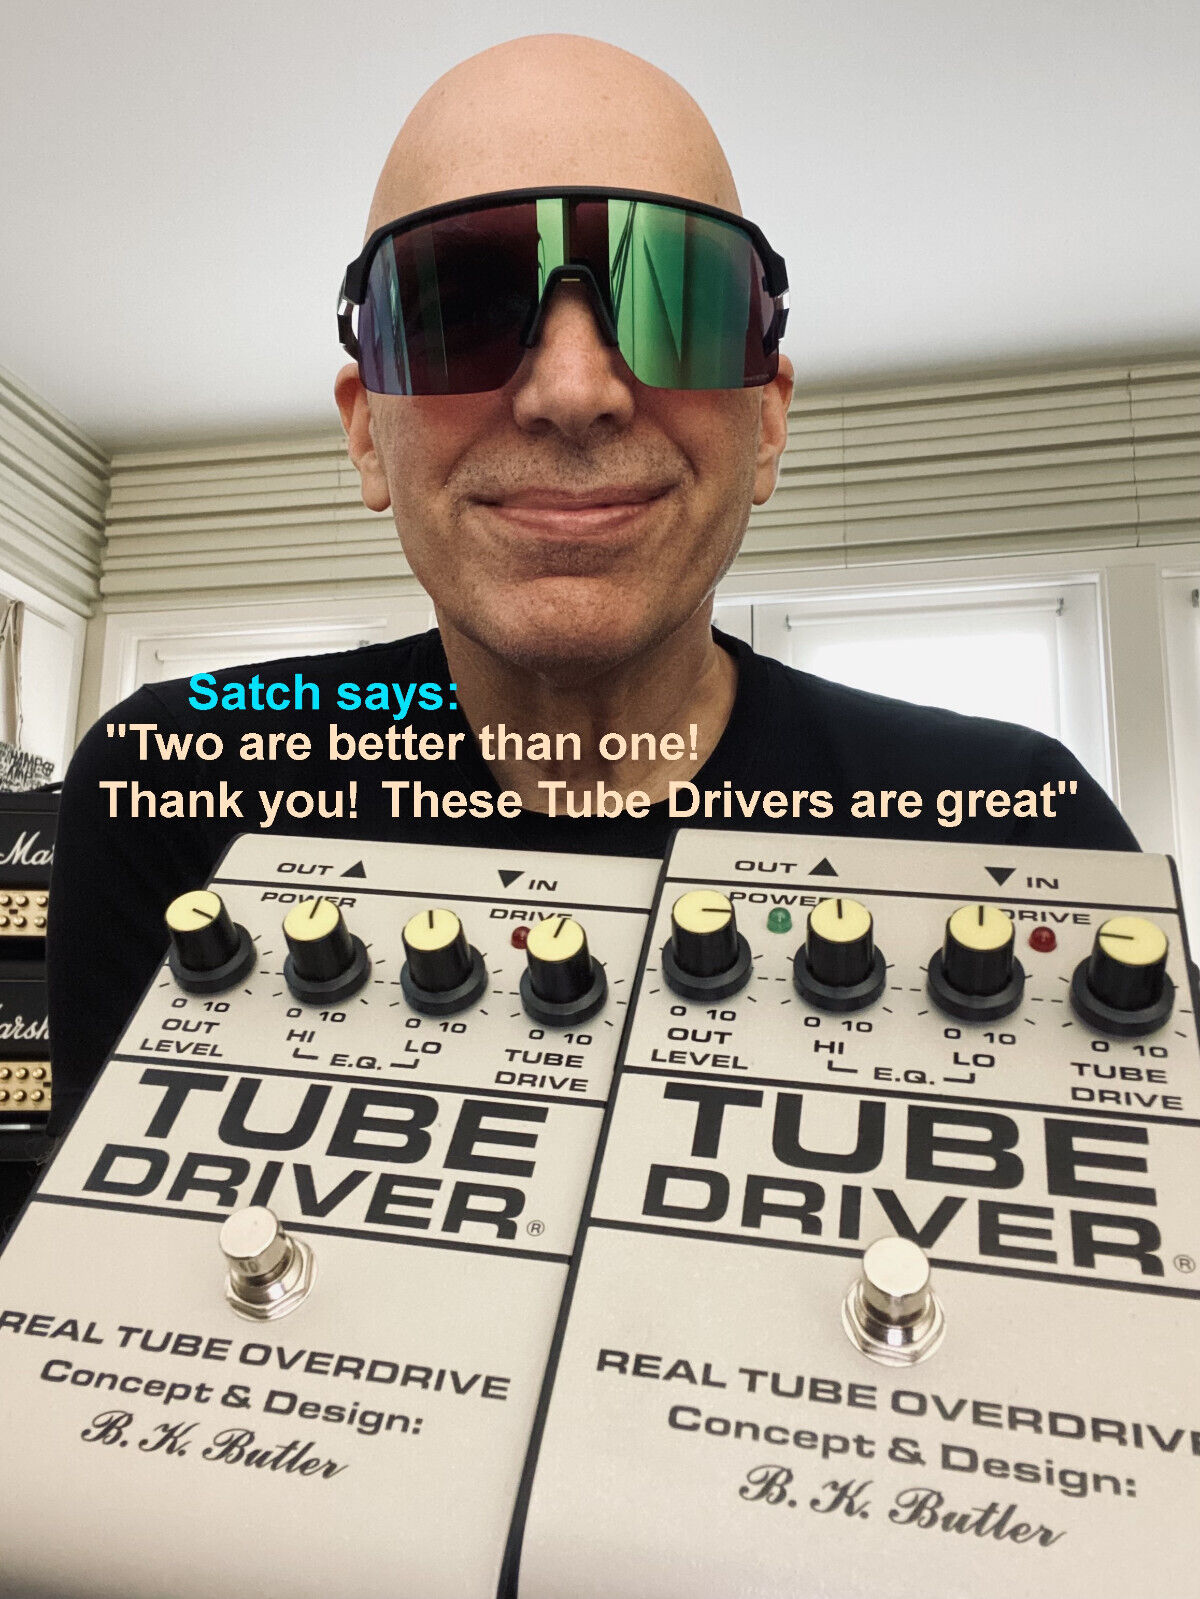 NEW! TUBE DRIVER - The Original * By BK BUTLER